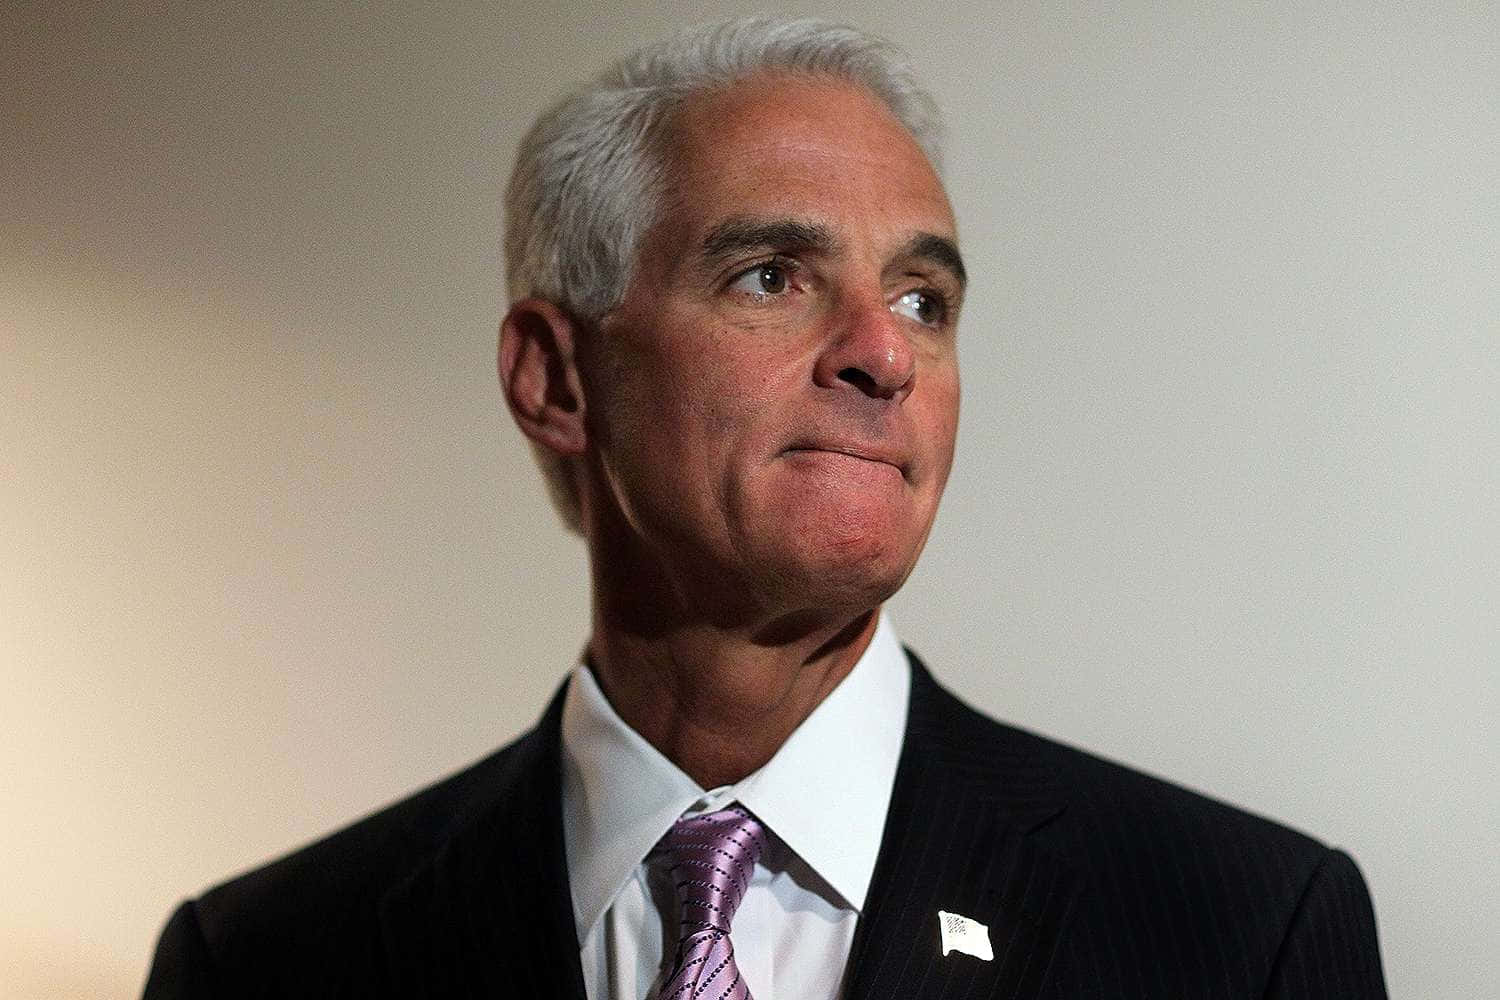 Former Governor Charlie Crist appearing worried during a public event Wallpaper